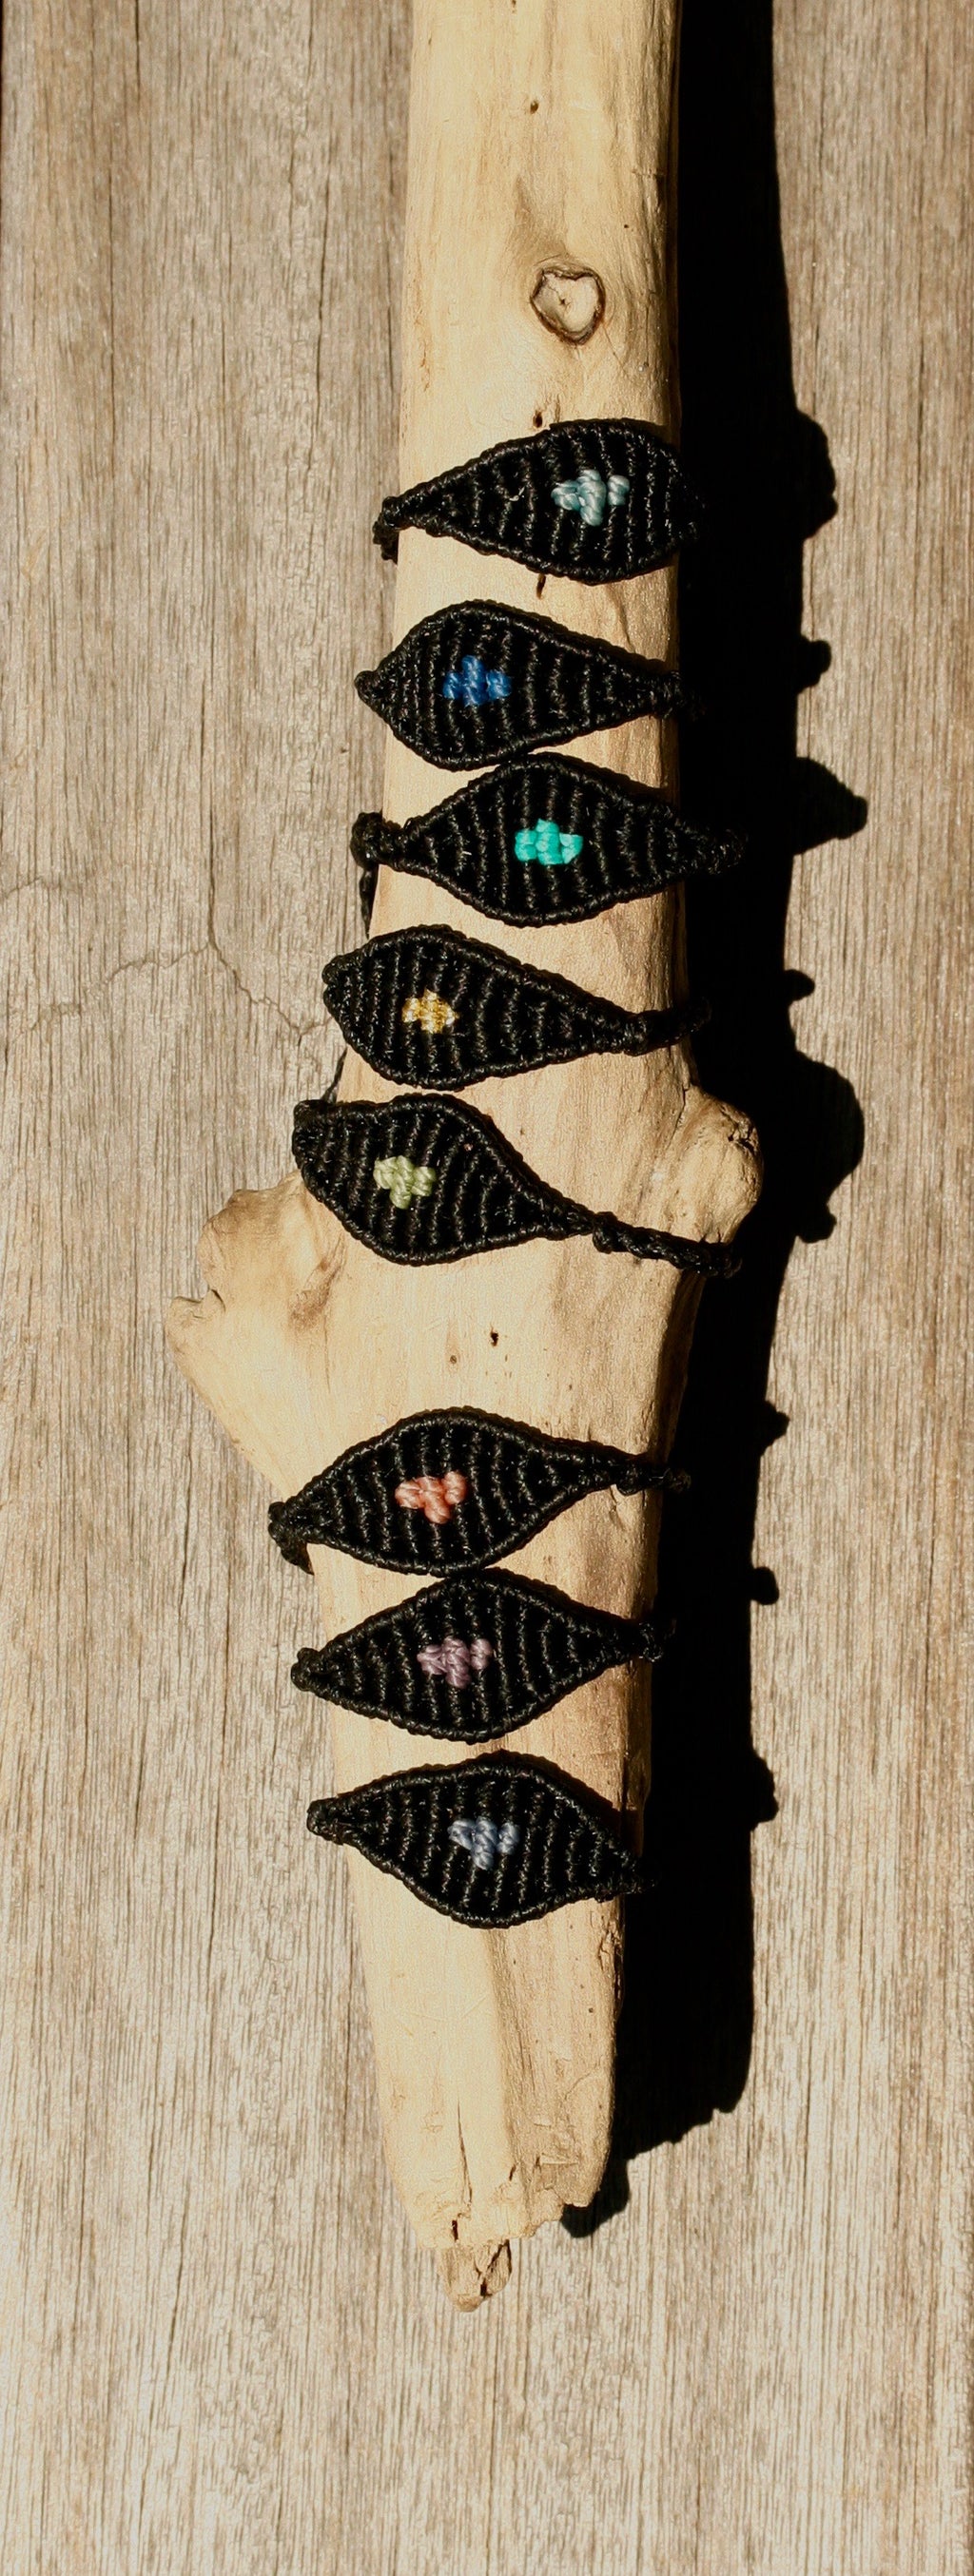 Woven Small Black With Assorted Color Center Evil Eye Bracelet